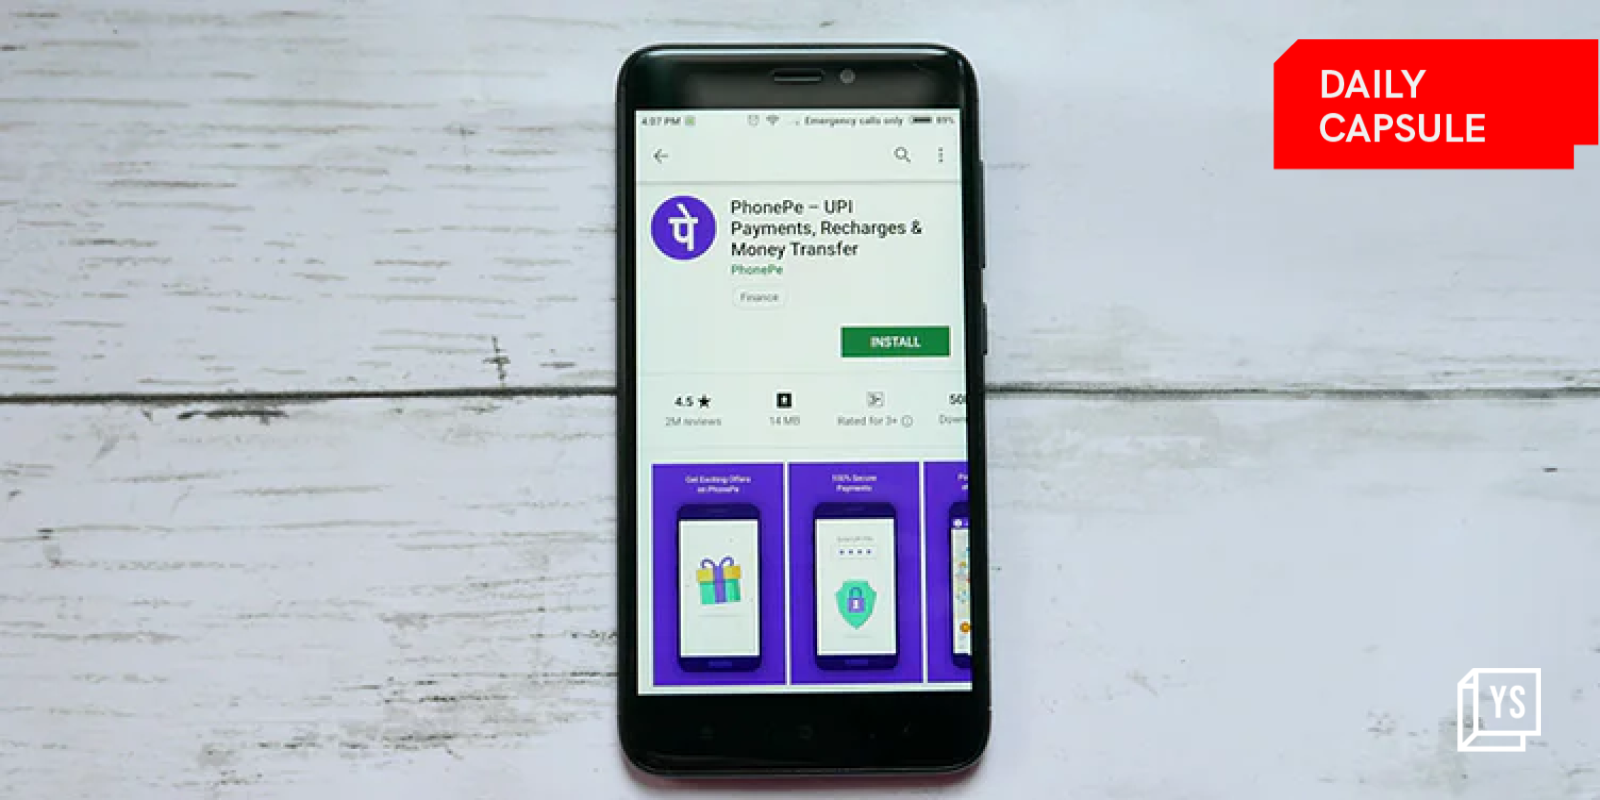 PhonePe’s expensive homecoming